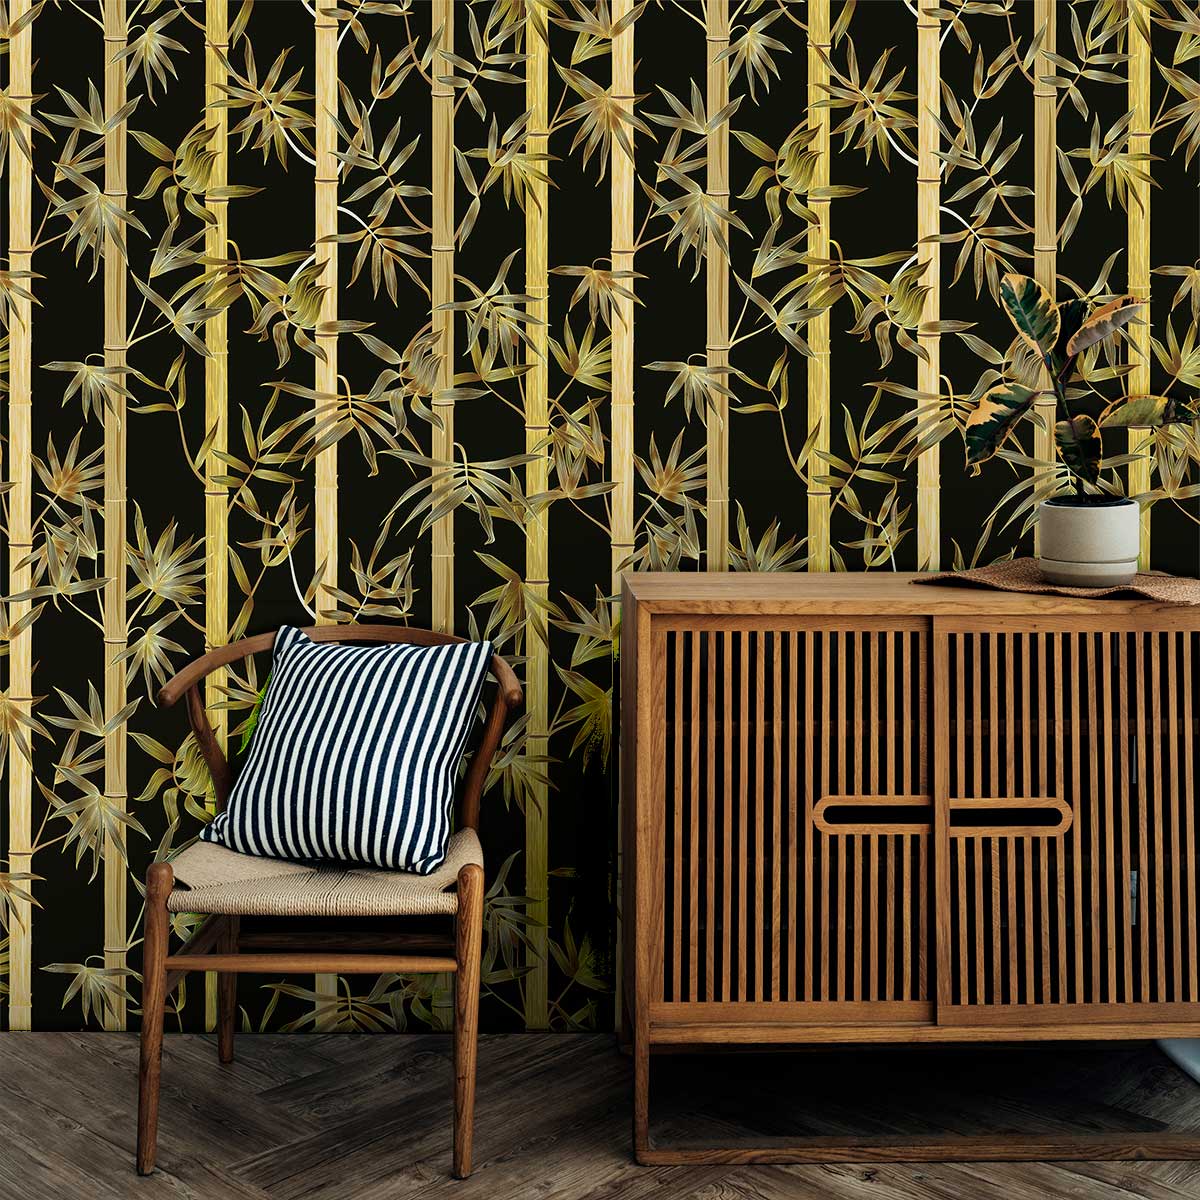 custom-made bamboo wallpaper that is both luxurious and cool